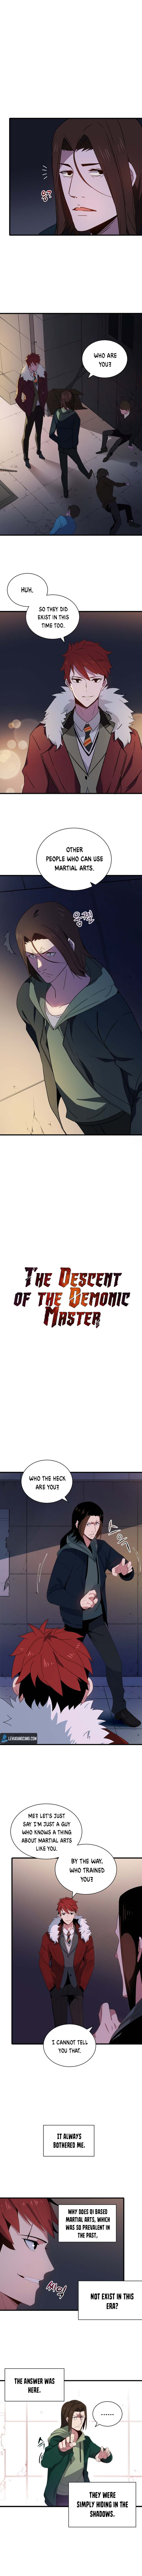 The Descent of the Demonic Master - Chapter 14 Page 2